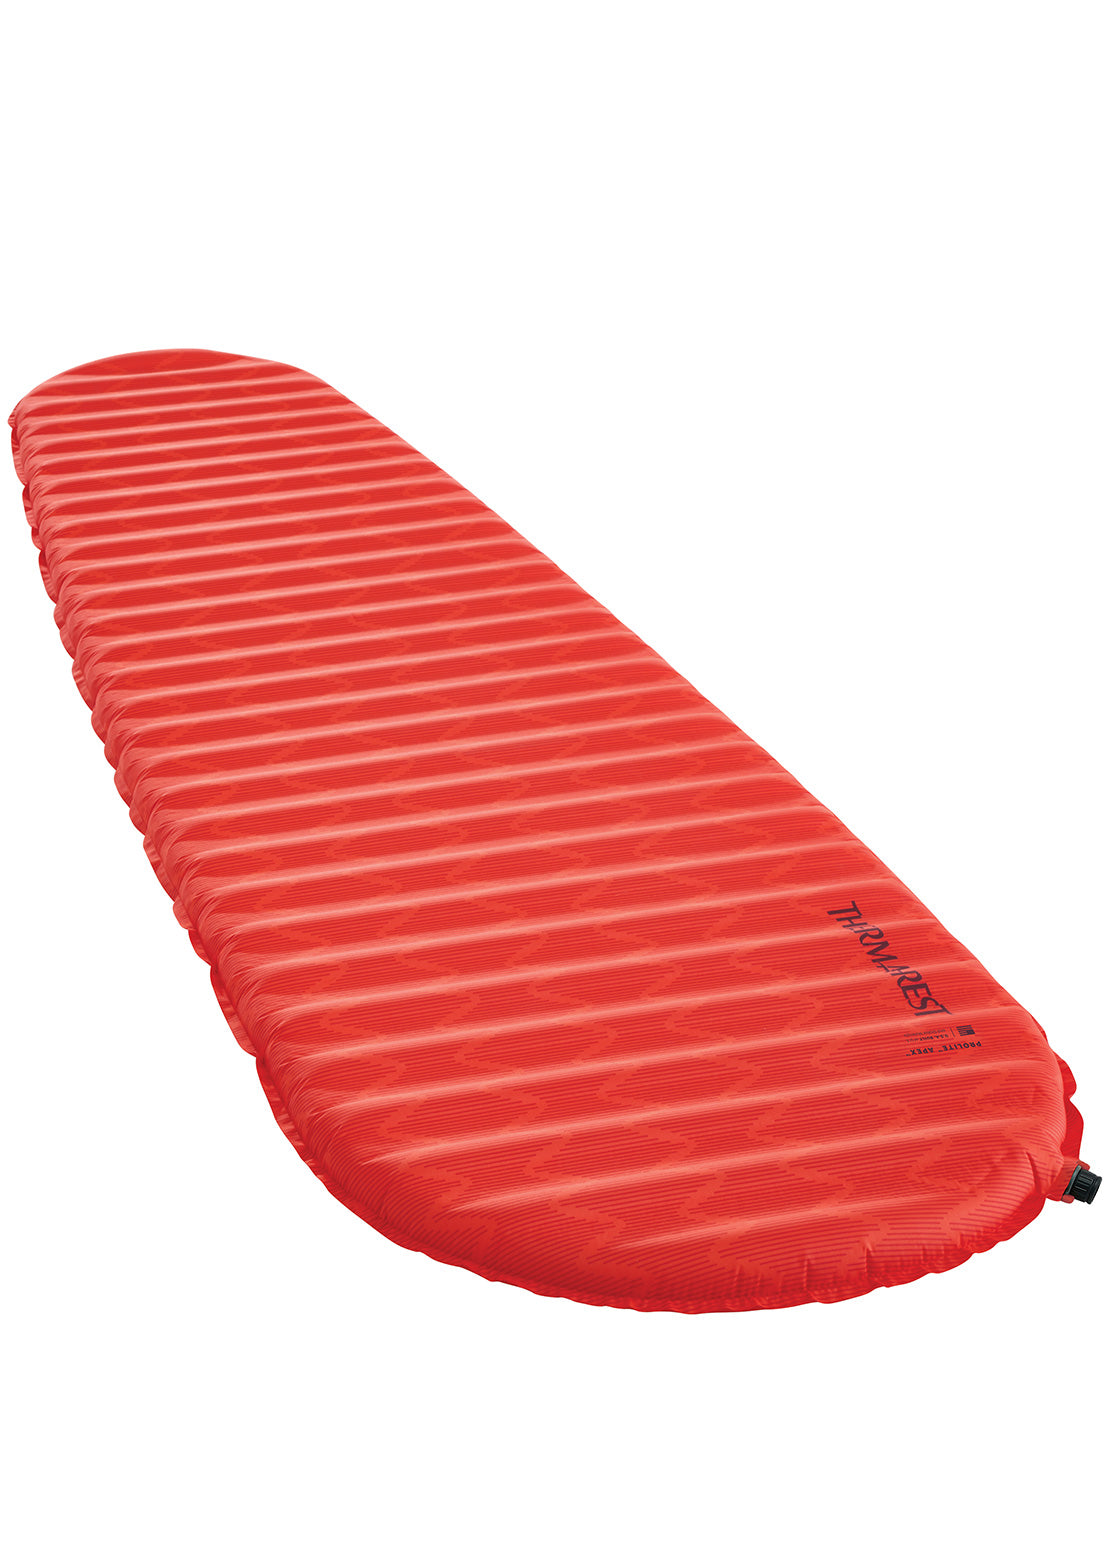 Therm-A-Rest ProLite Apex Large Sleeping Pad Heat Wave